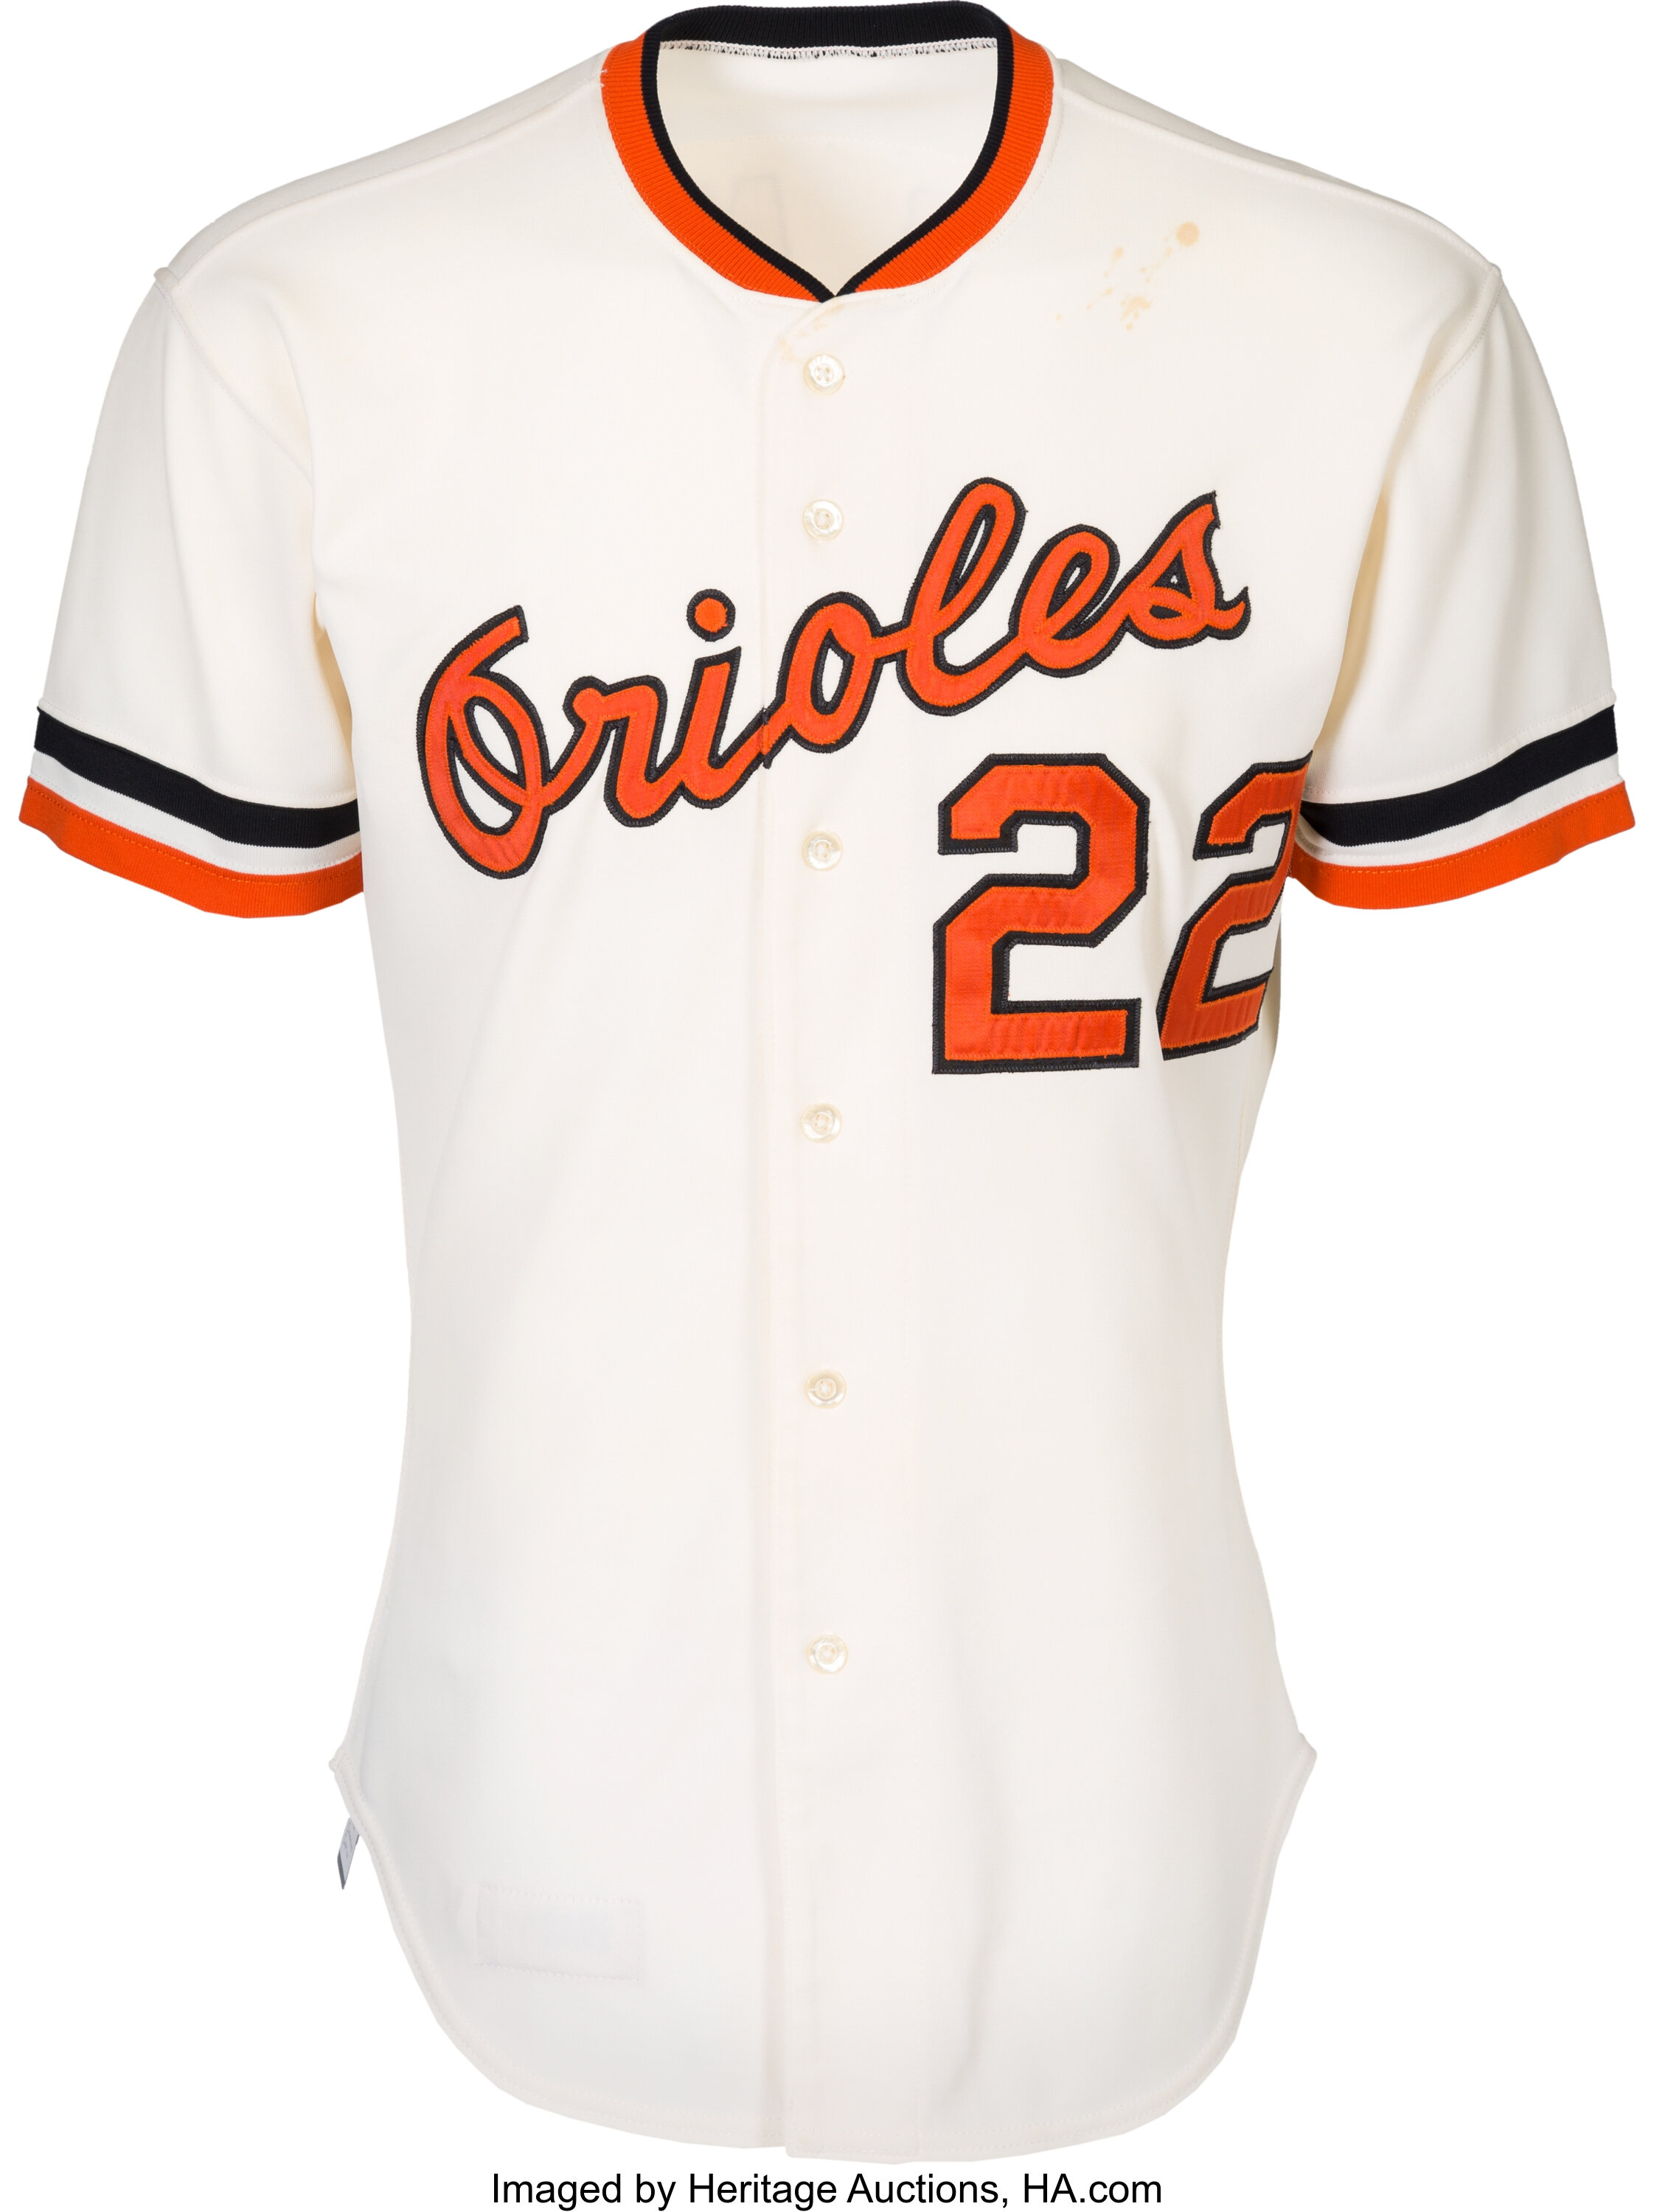 Authentic Jim Palmer Baltimore Orioles 1970 Wool Jersey - Shop